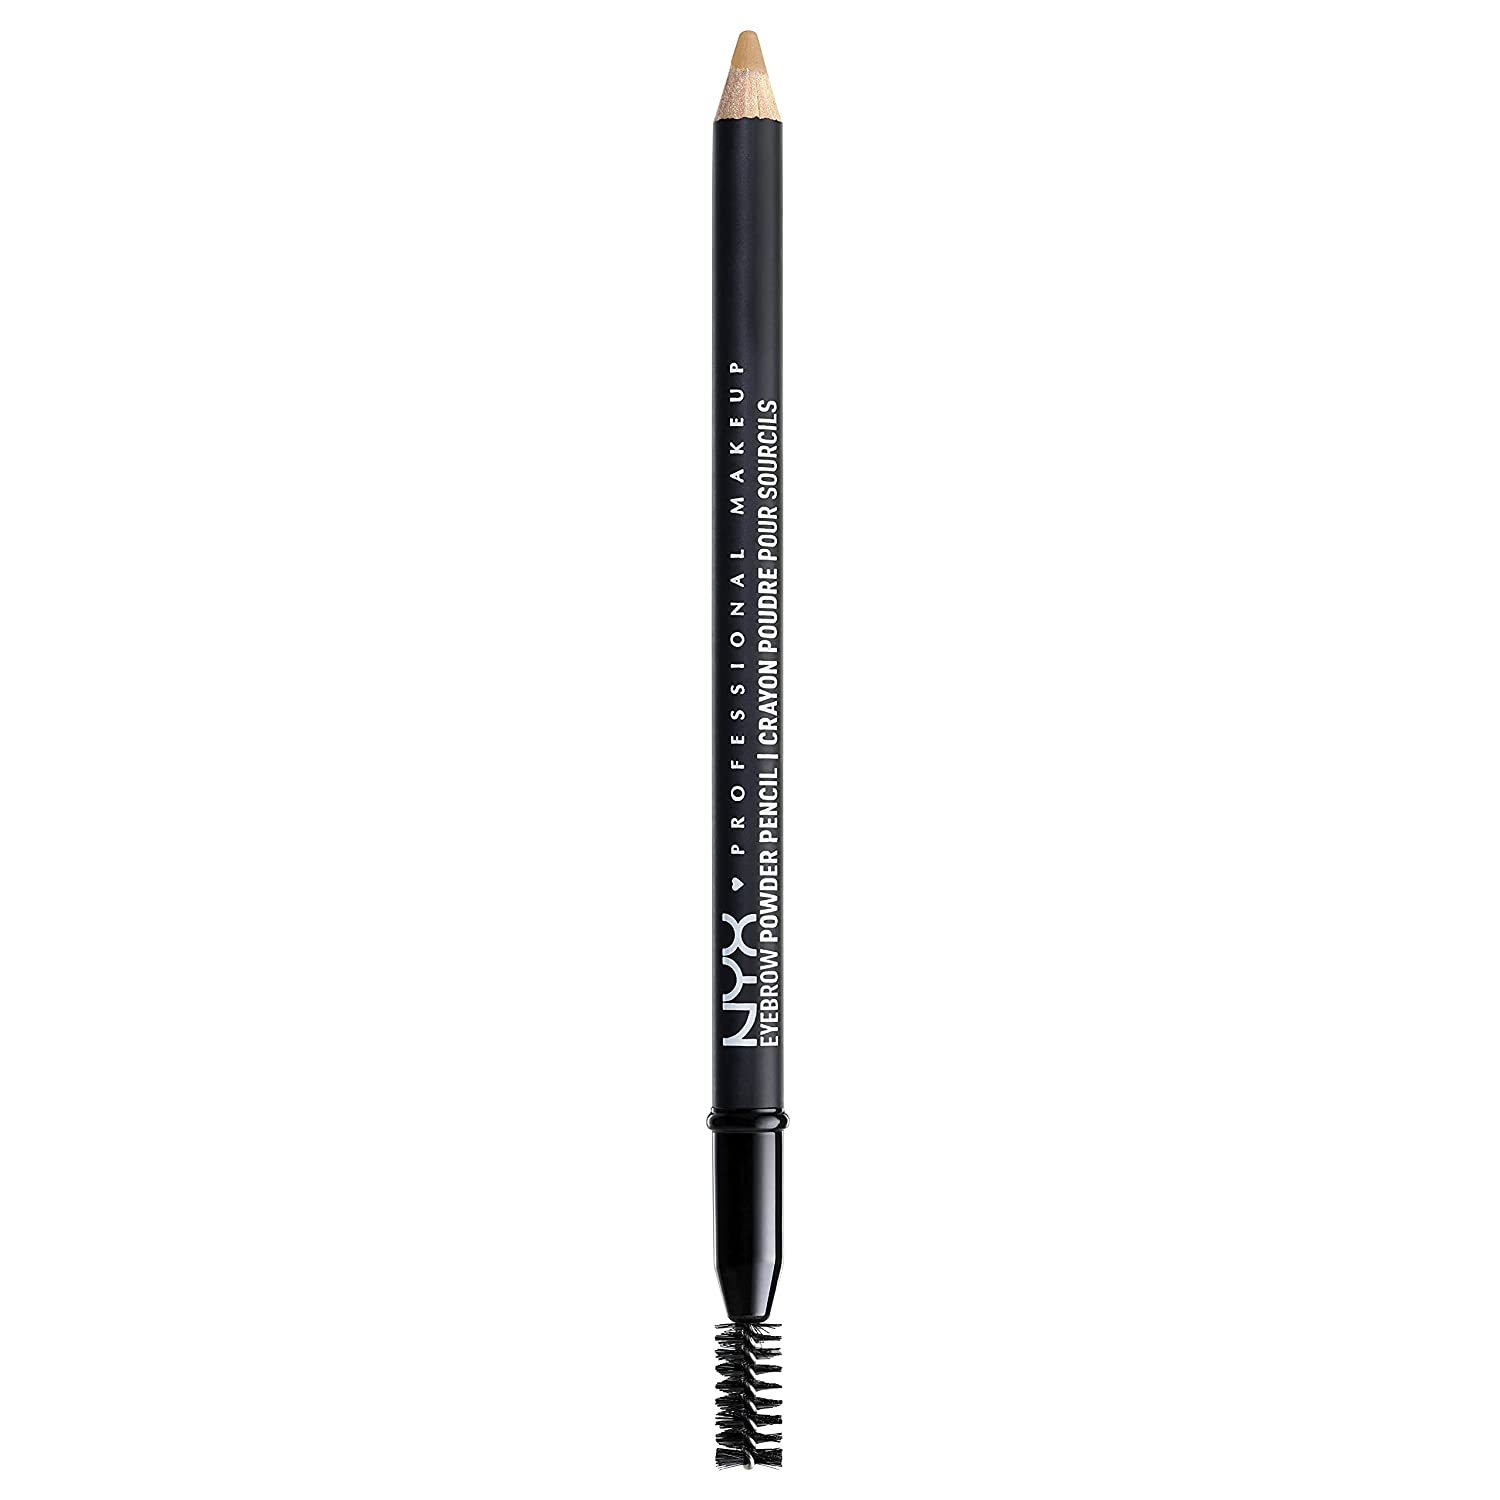 NYX Professional Makeup Eyebrow Powder Pencil (Select Shades) $1.09 + w/ S&S + Free Shipping w/ Prime or $25+